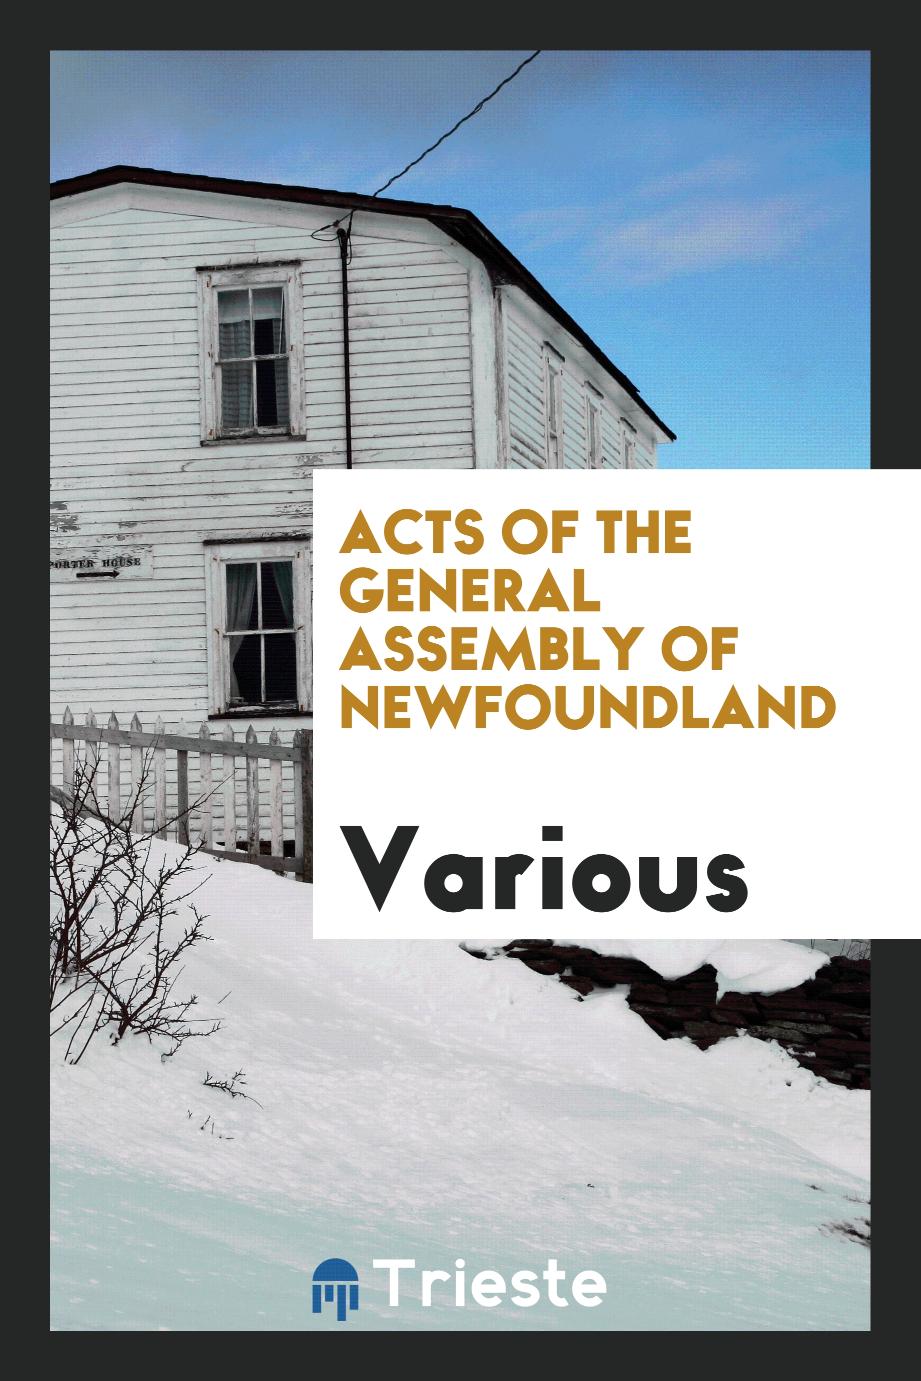 Acts of the General assembly of Newfoundland